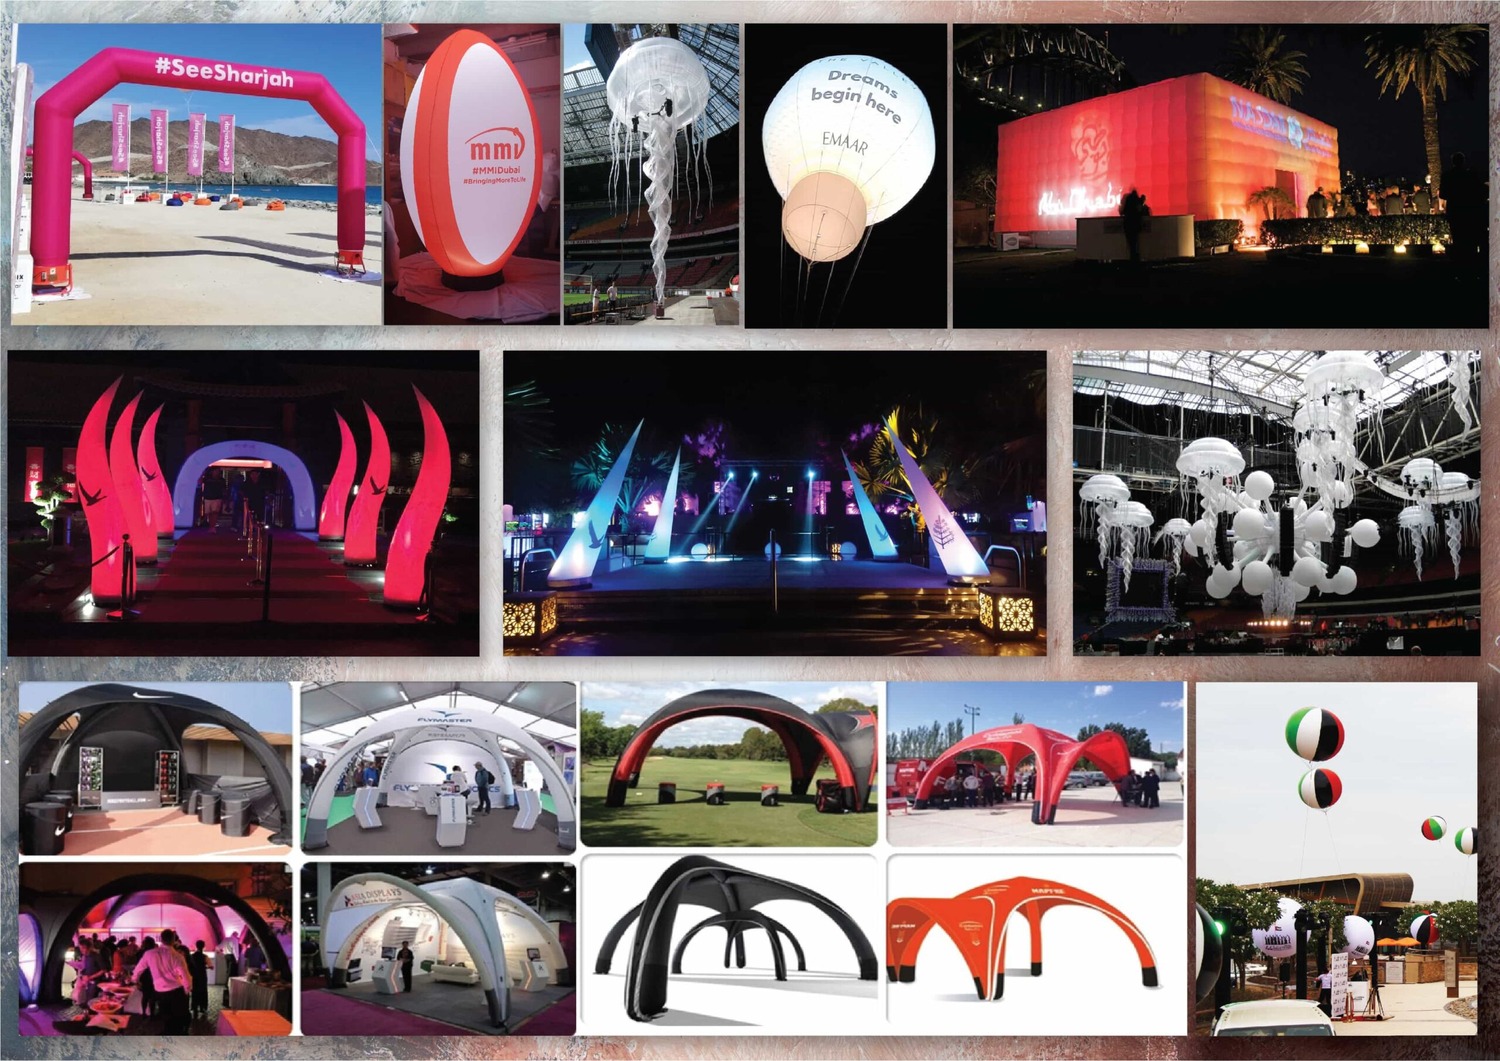 How to make a befitting branding exercise with Inflatables in Dubai?